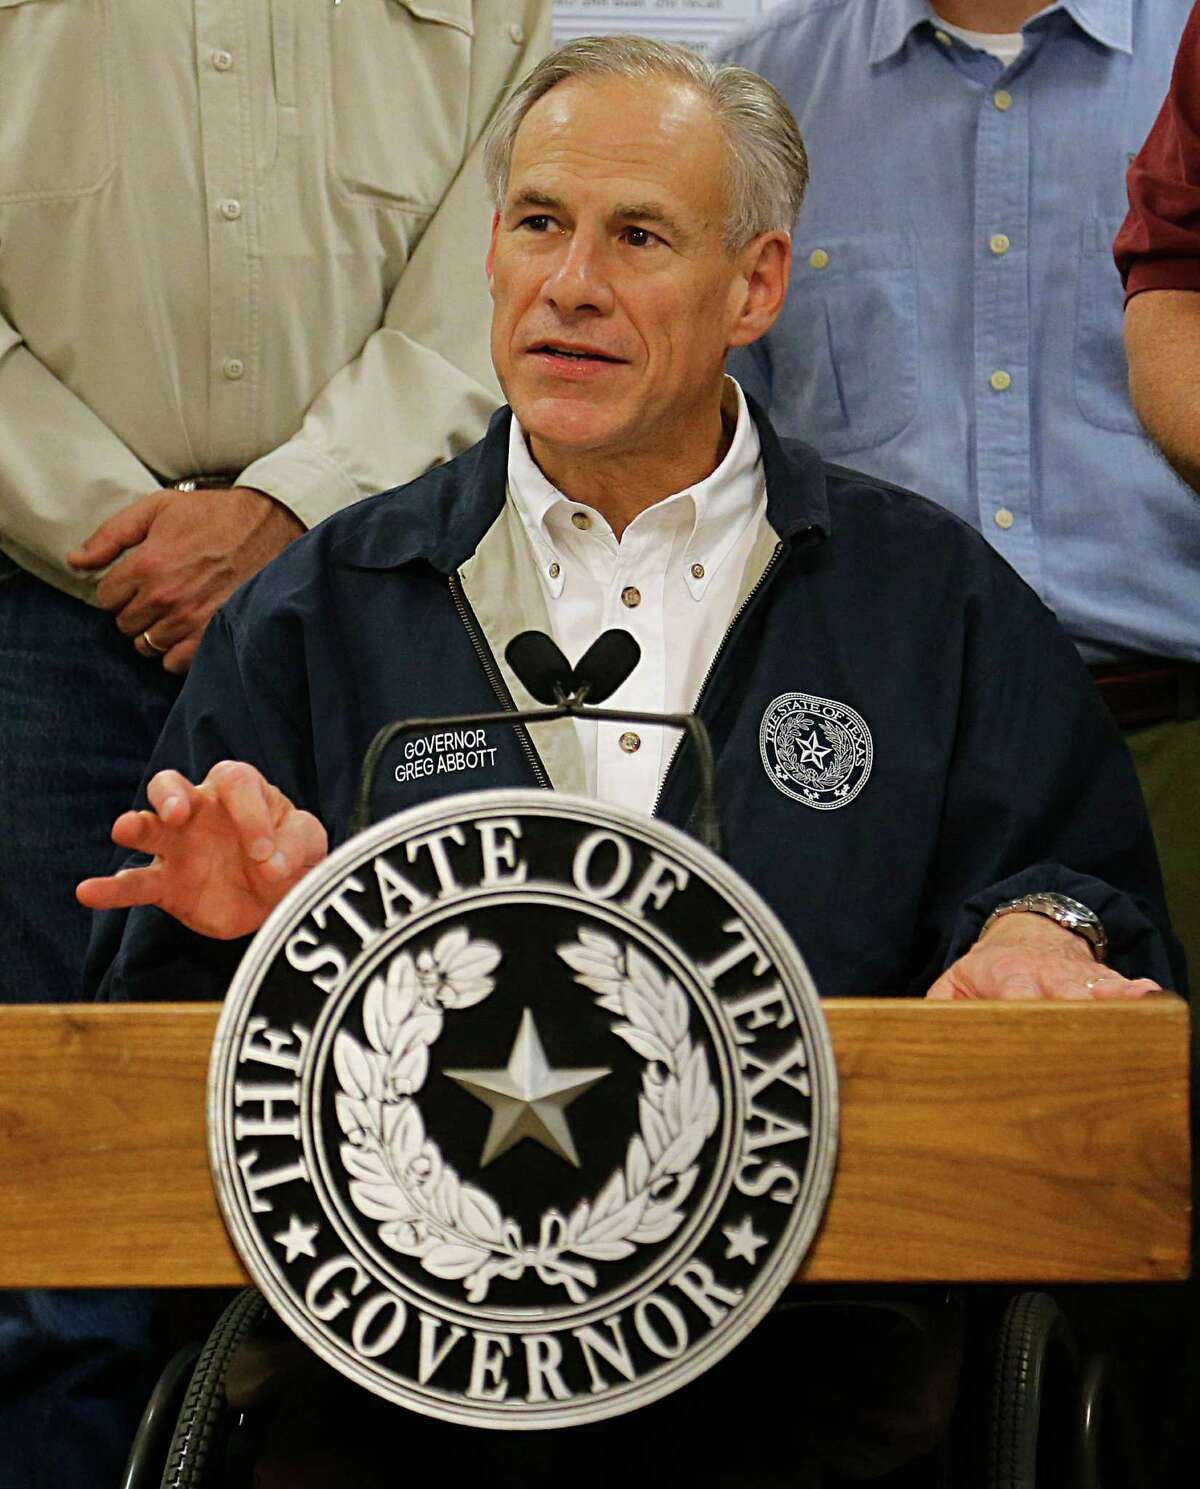 Texas Governor Greg Abbott speaks at a press conference at the Brazoria County Court at Law after taking an aerial tour of Brazoria and Fort Bend Counties Friday, June 3, 2016, in Angleton. ( James Nielsen / Houston Chronicle )